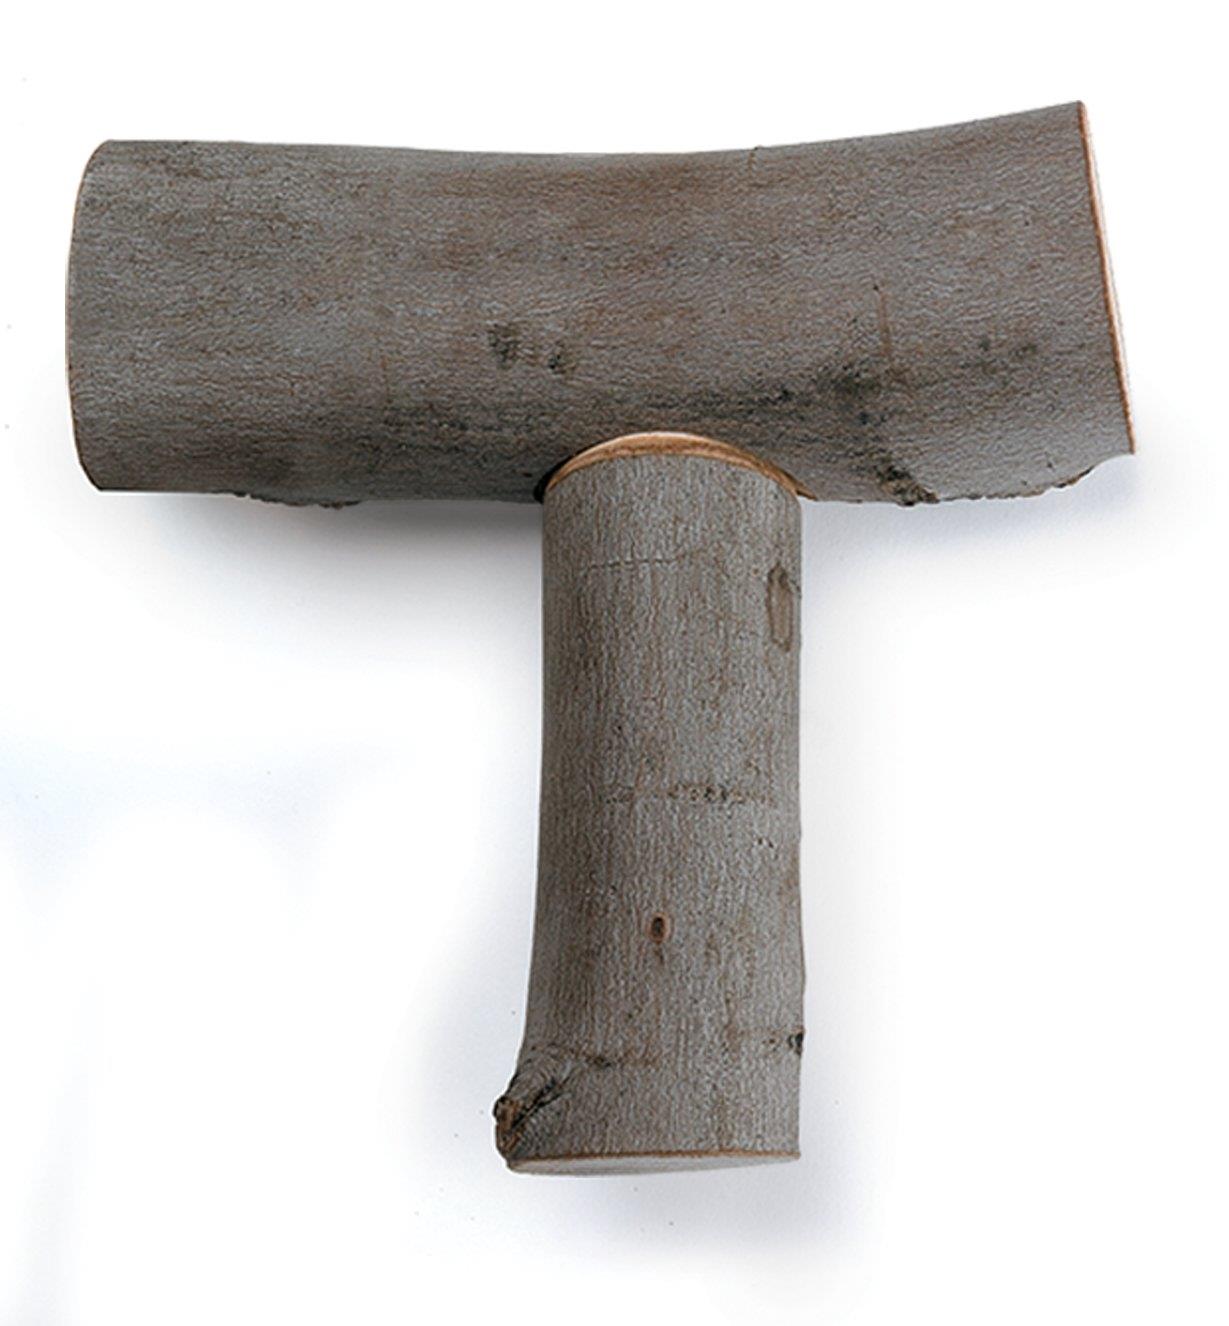 Example of a close-fitting joint on rustic stock